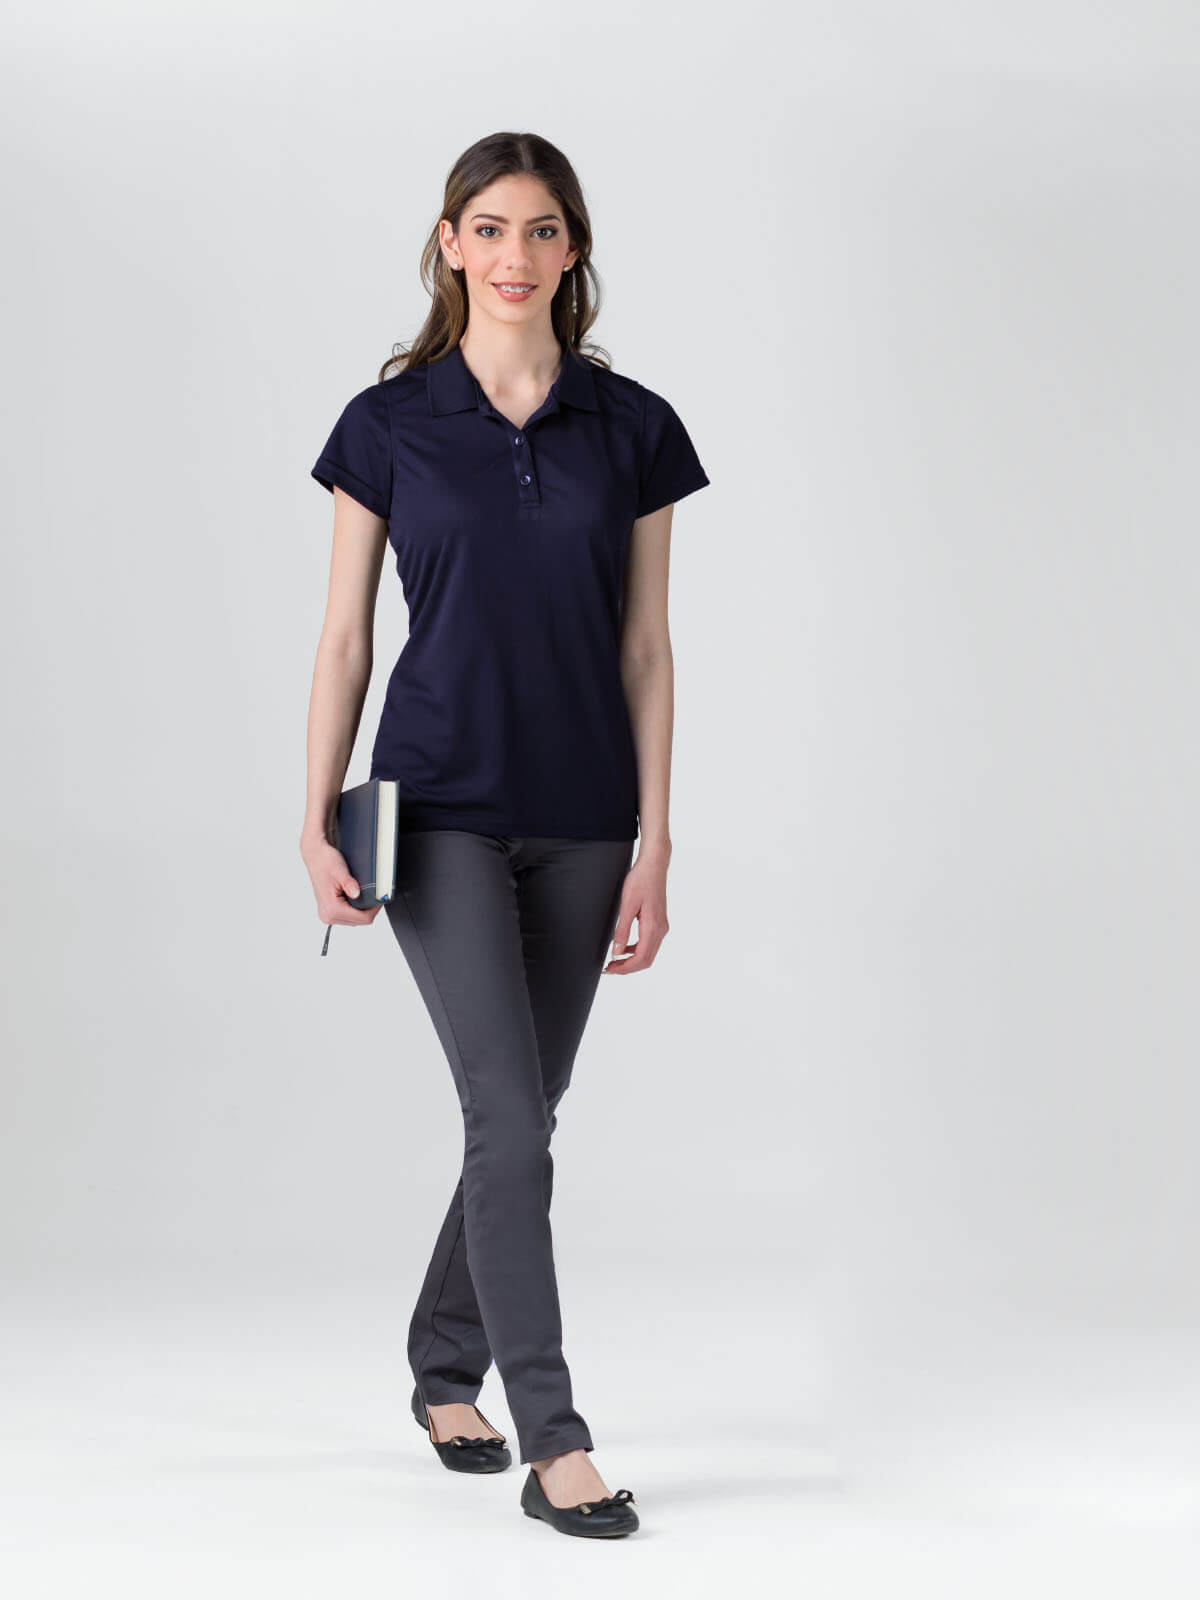 dry fit polo USA women navy